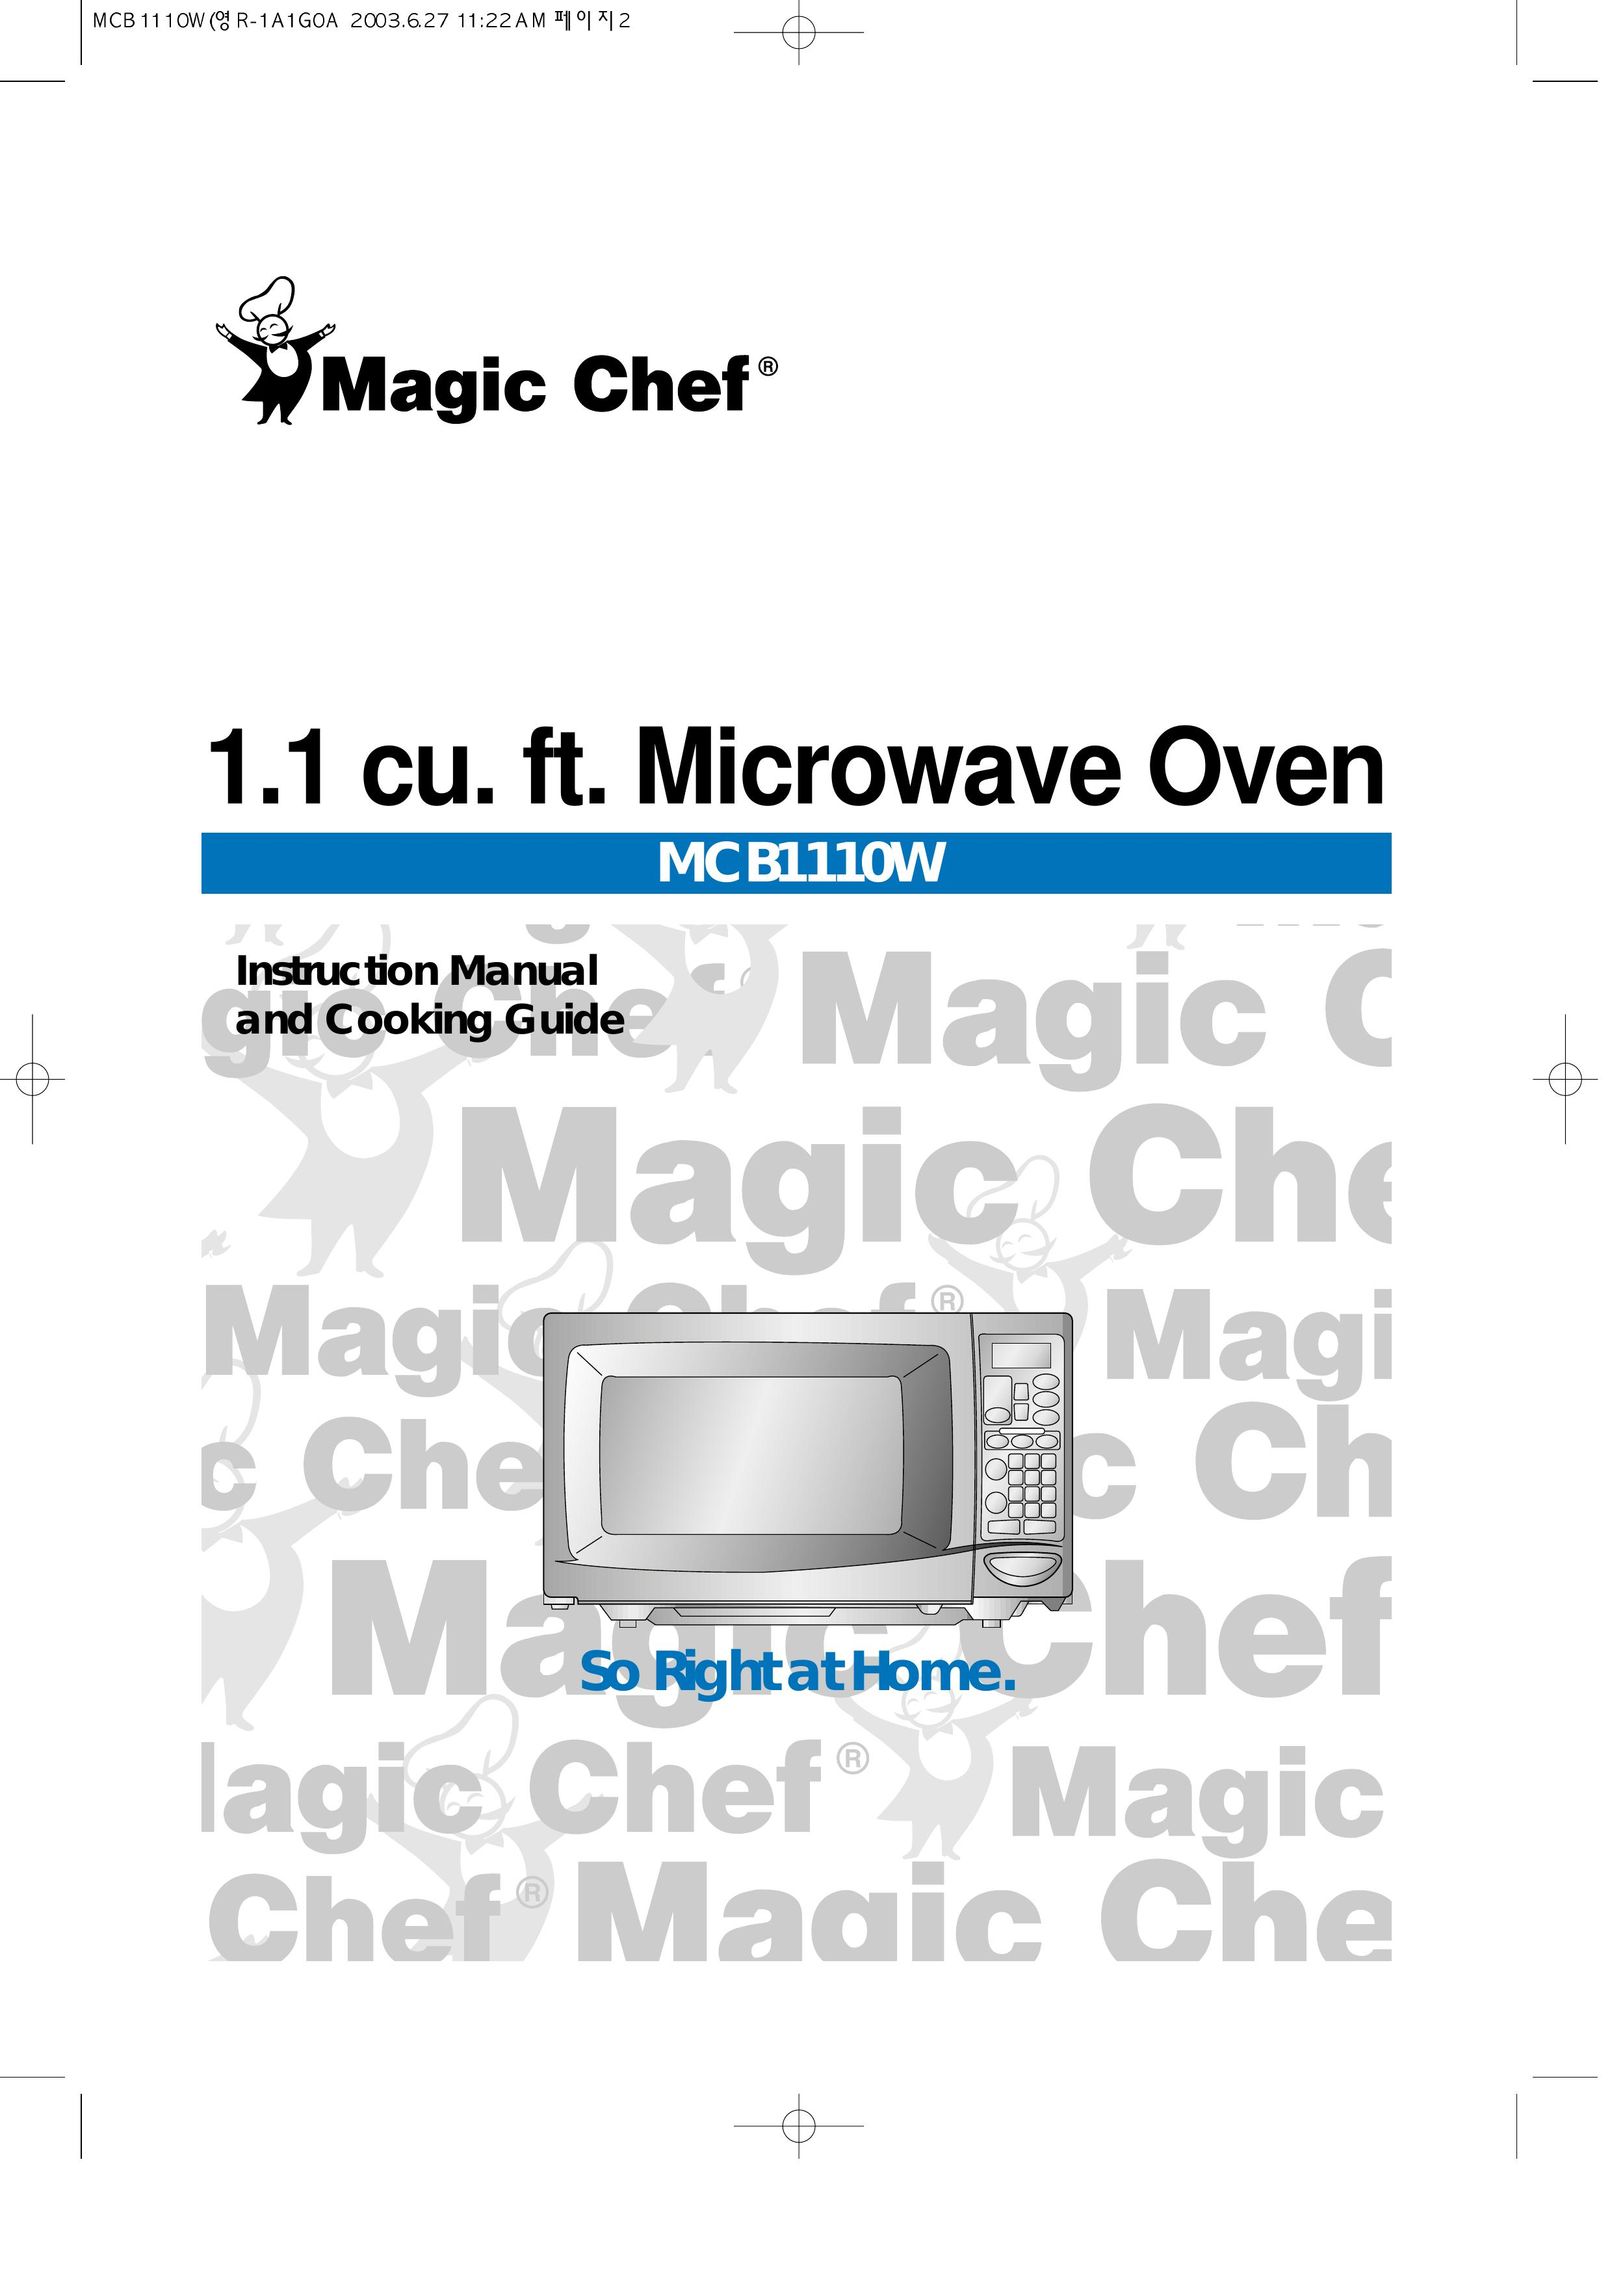 Magic Chef MCB1110W Microwave Oven User Manual